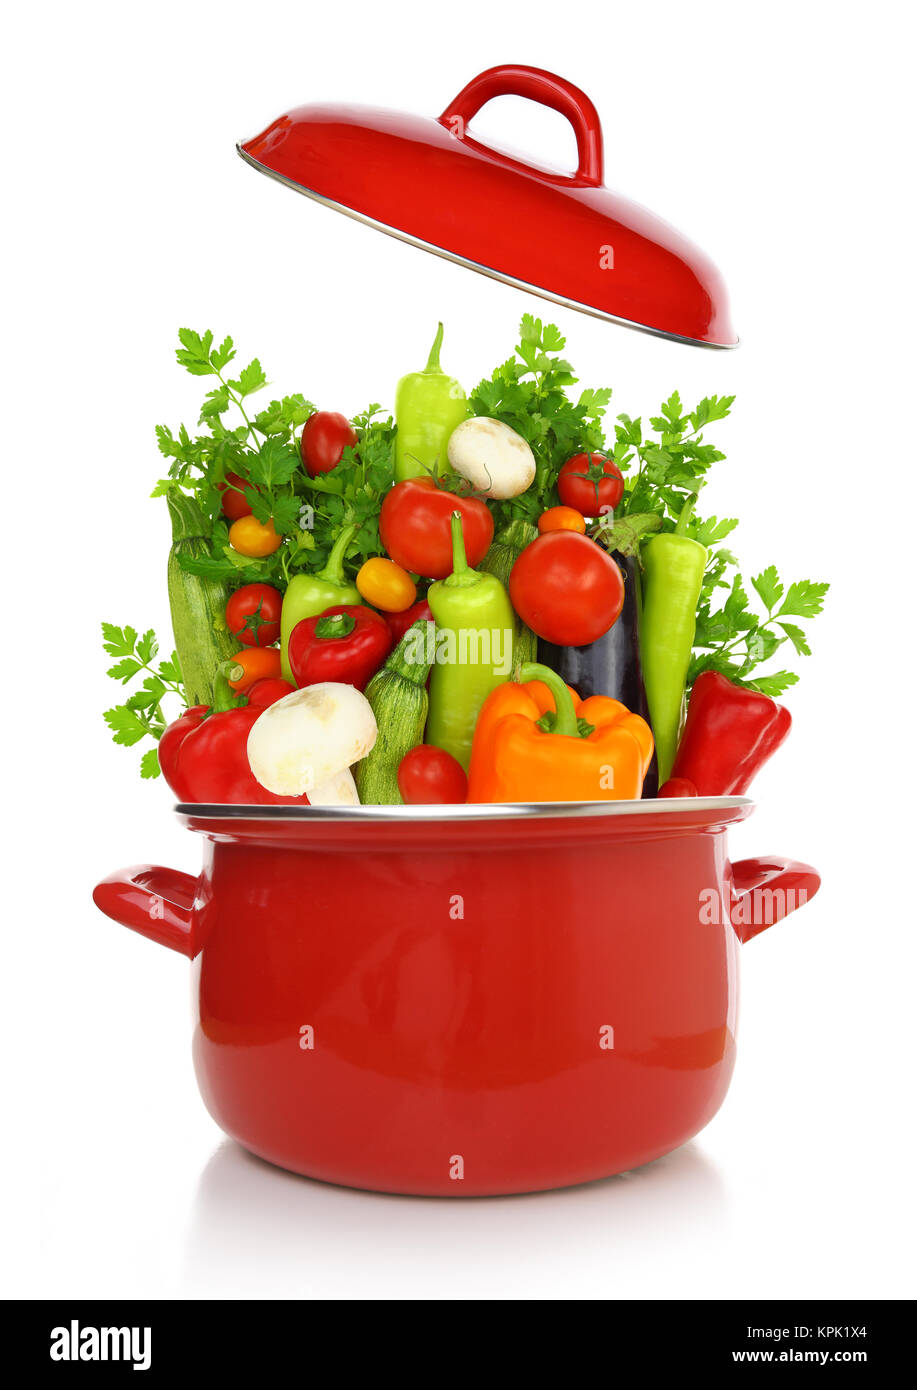 Colorful vegetables in a red cooking pot isolated on white background Stock Photo